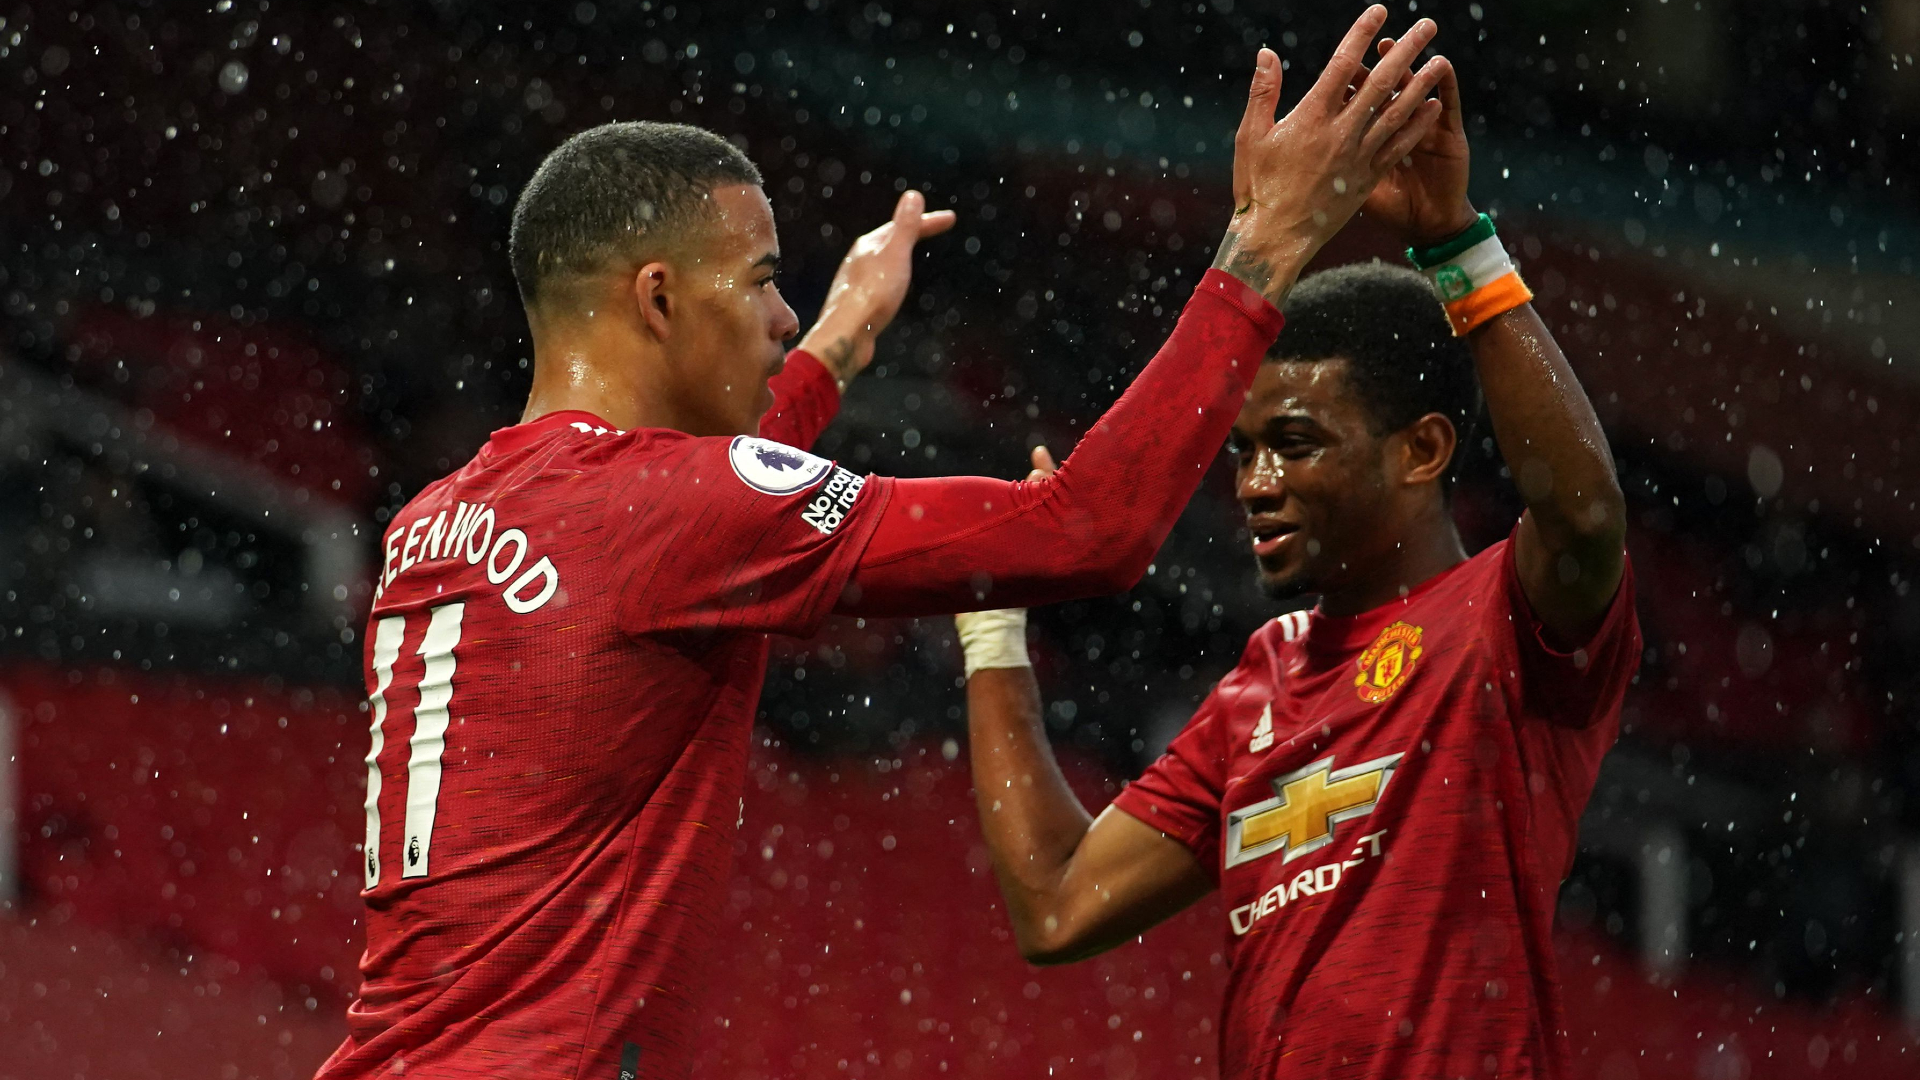 Manchester United wonderkids Mason Greenwood and Amad Diallo nominated for the Golden Boy award